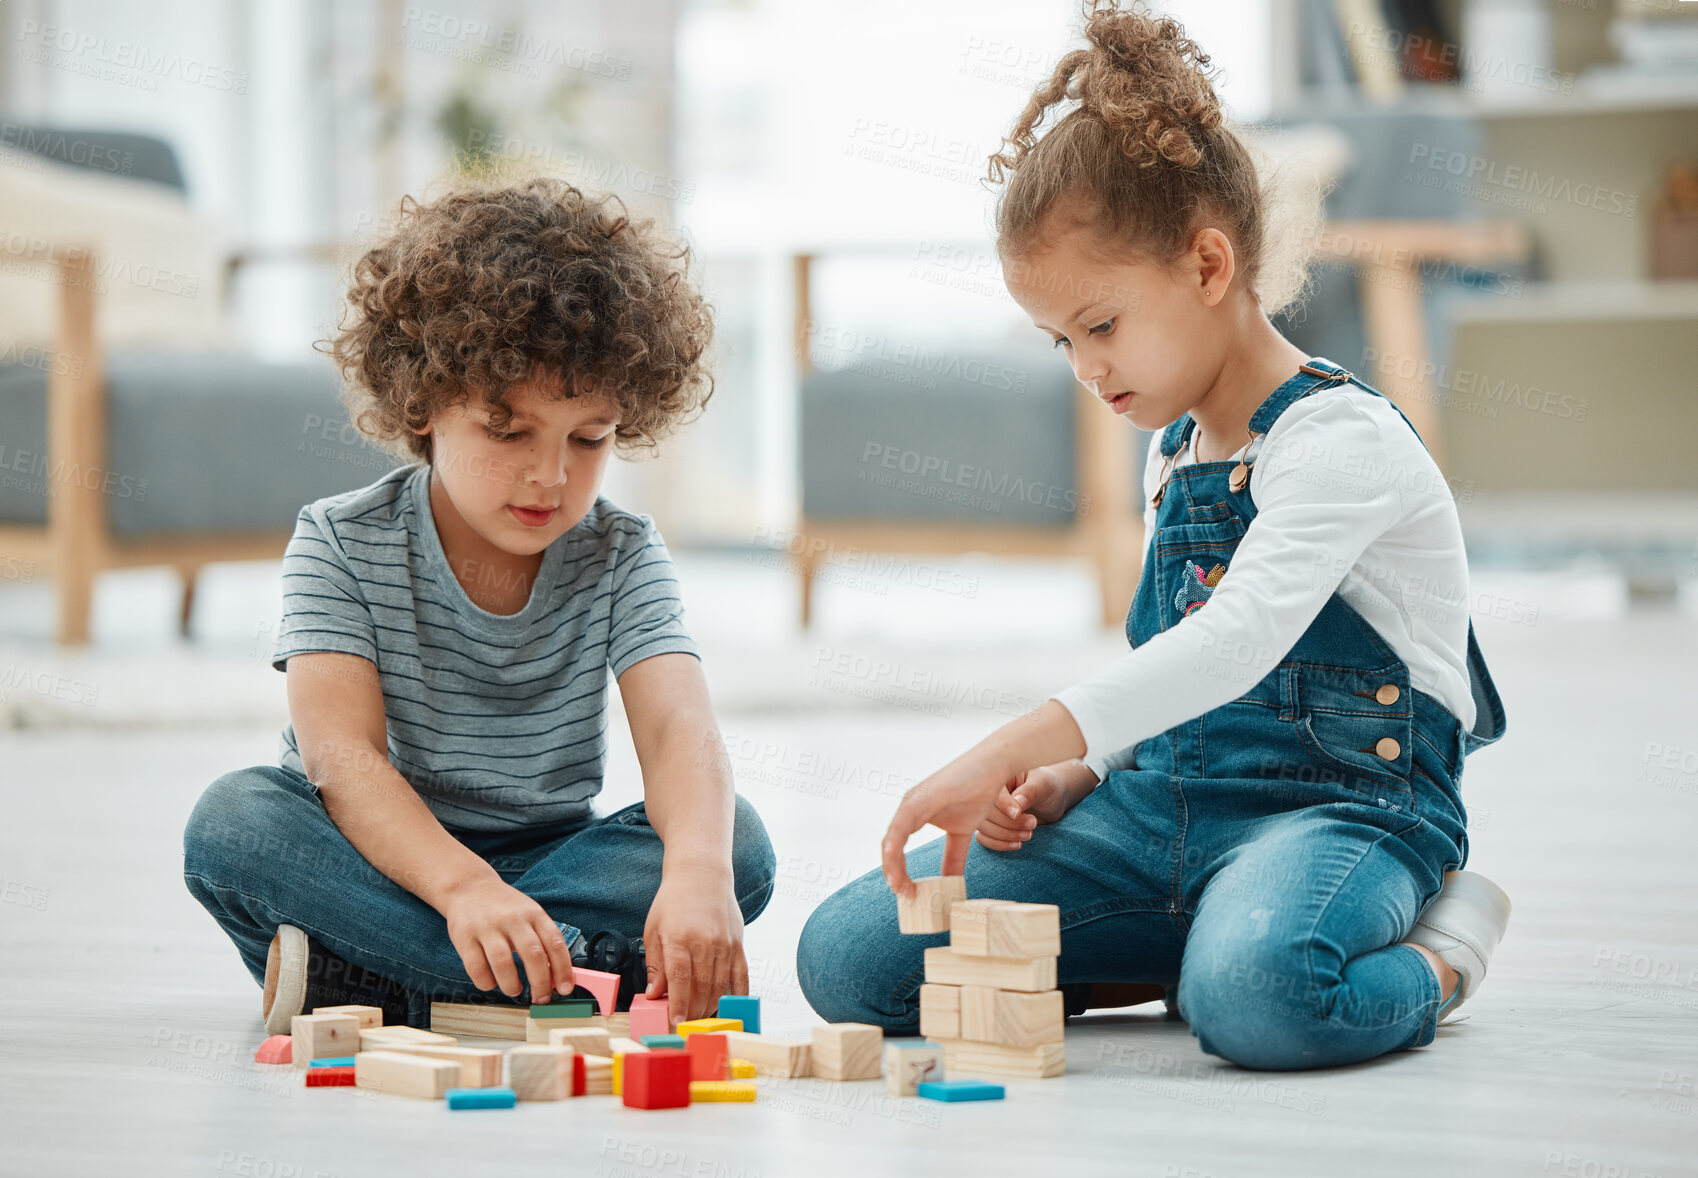 Buy stock photo Shot of two siblings playing with building blocks